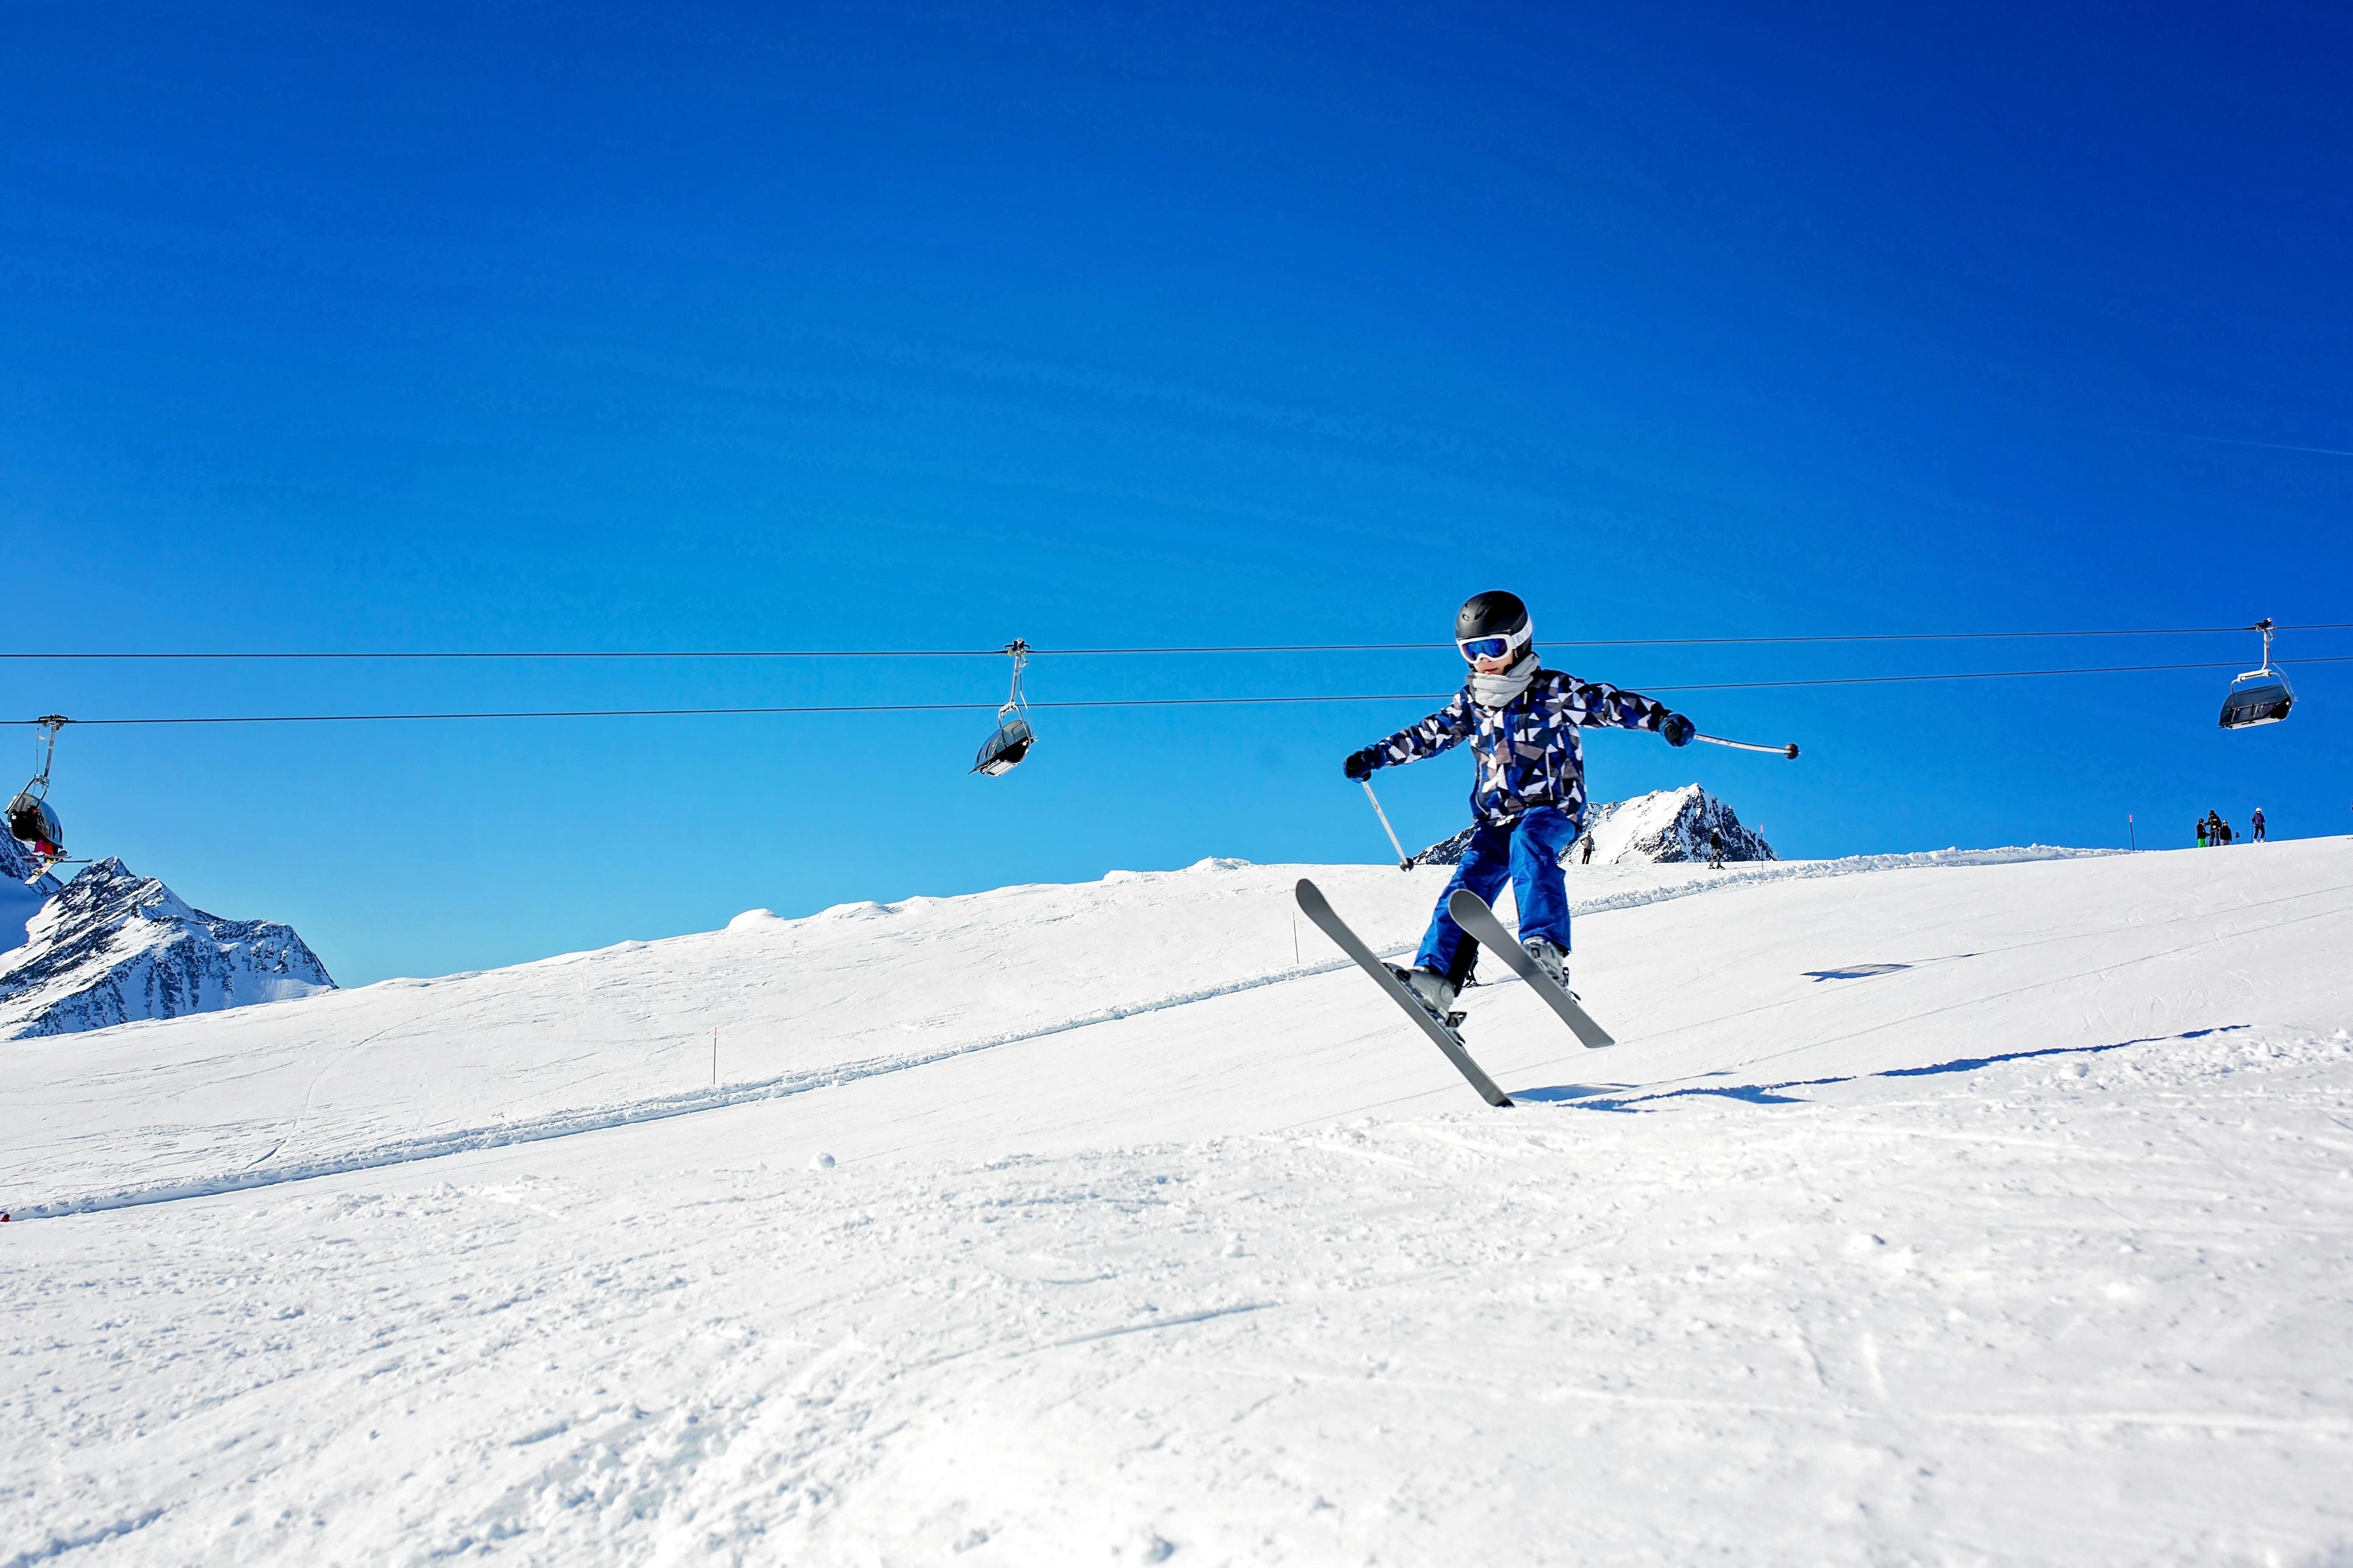 A young girl on skis catches air